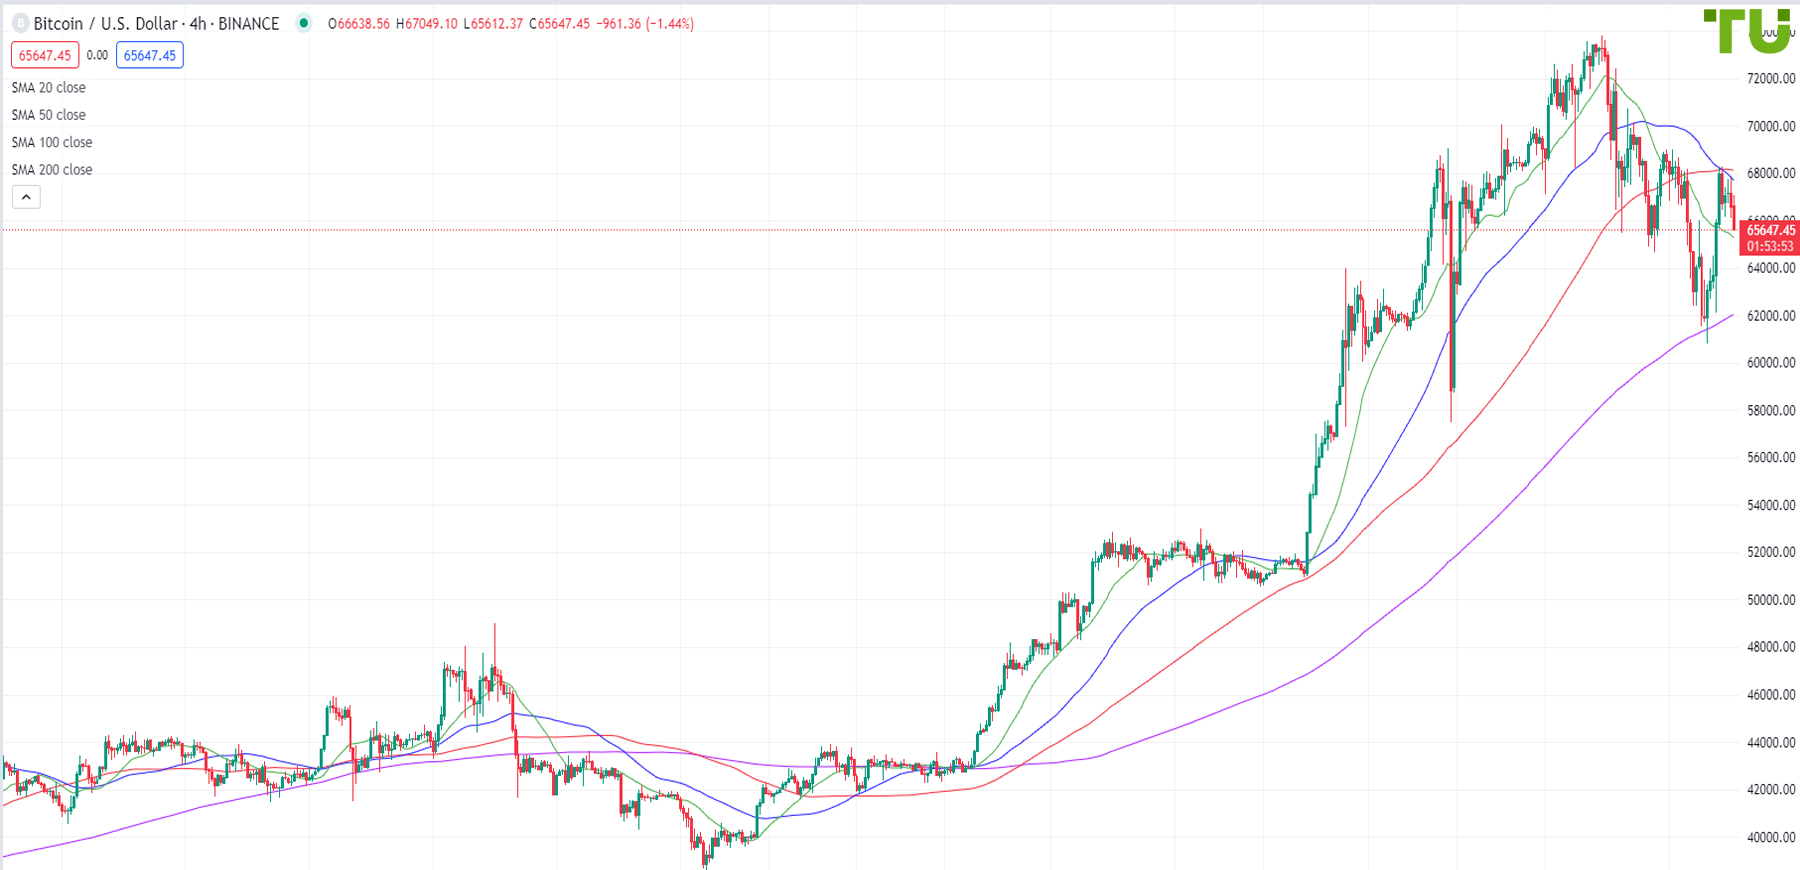 BTC/USD declines amid outflow of funds from GBTC Greyscale